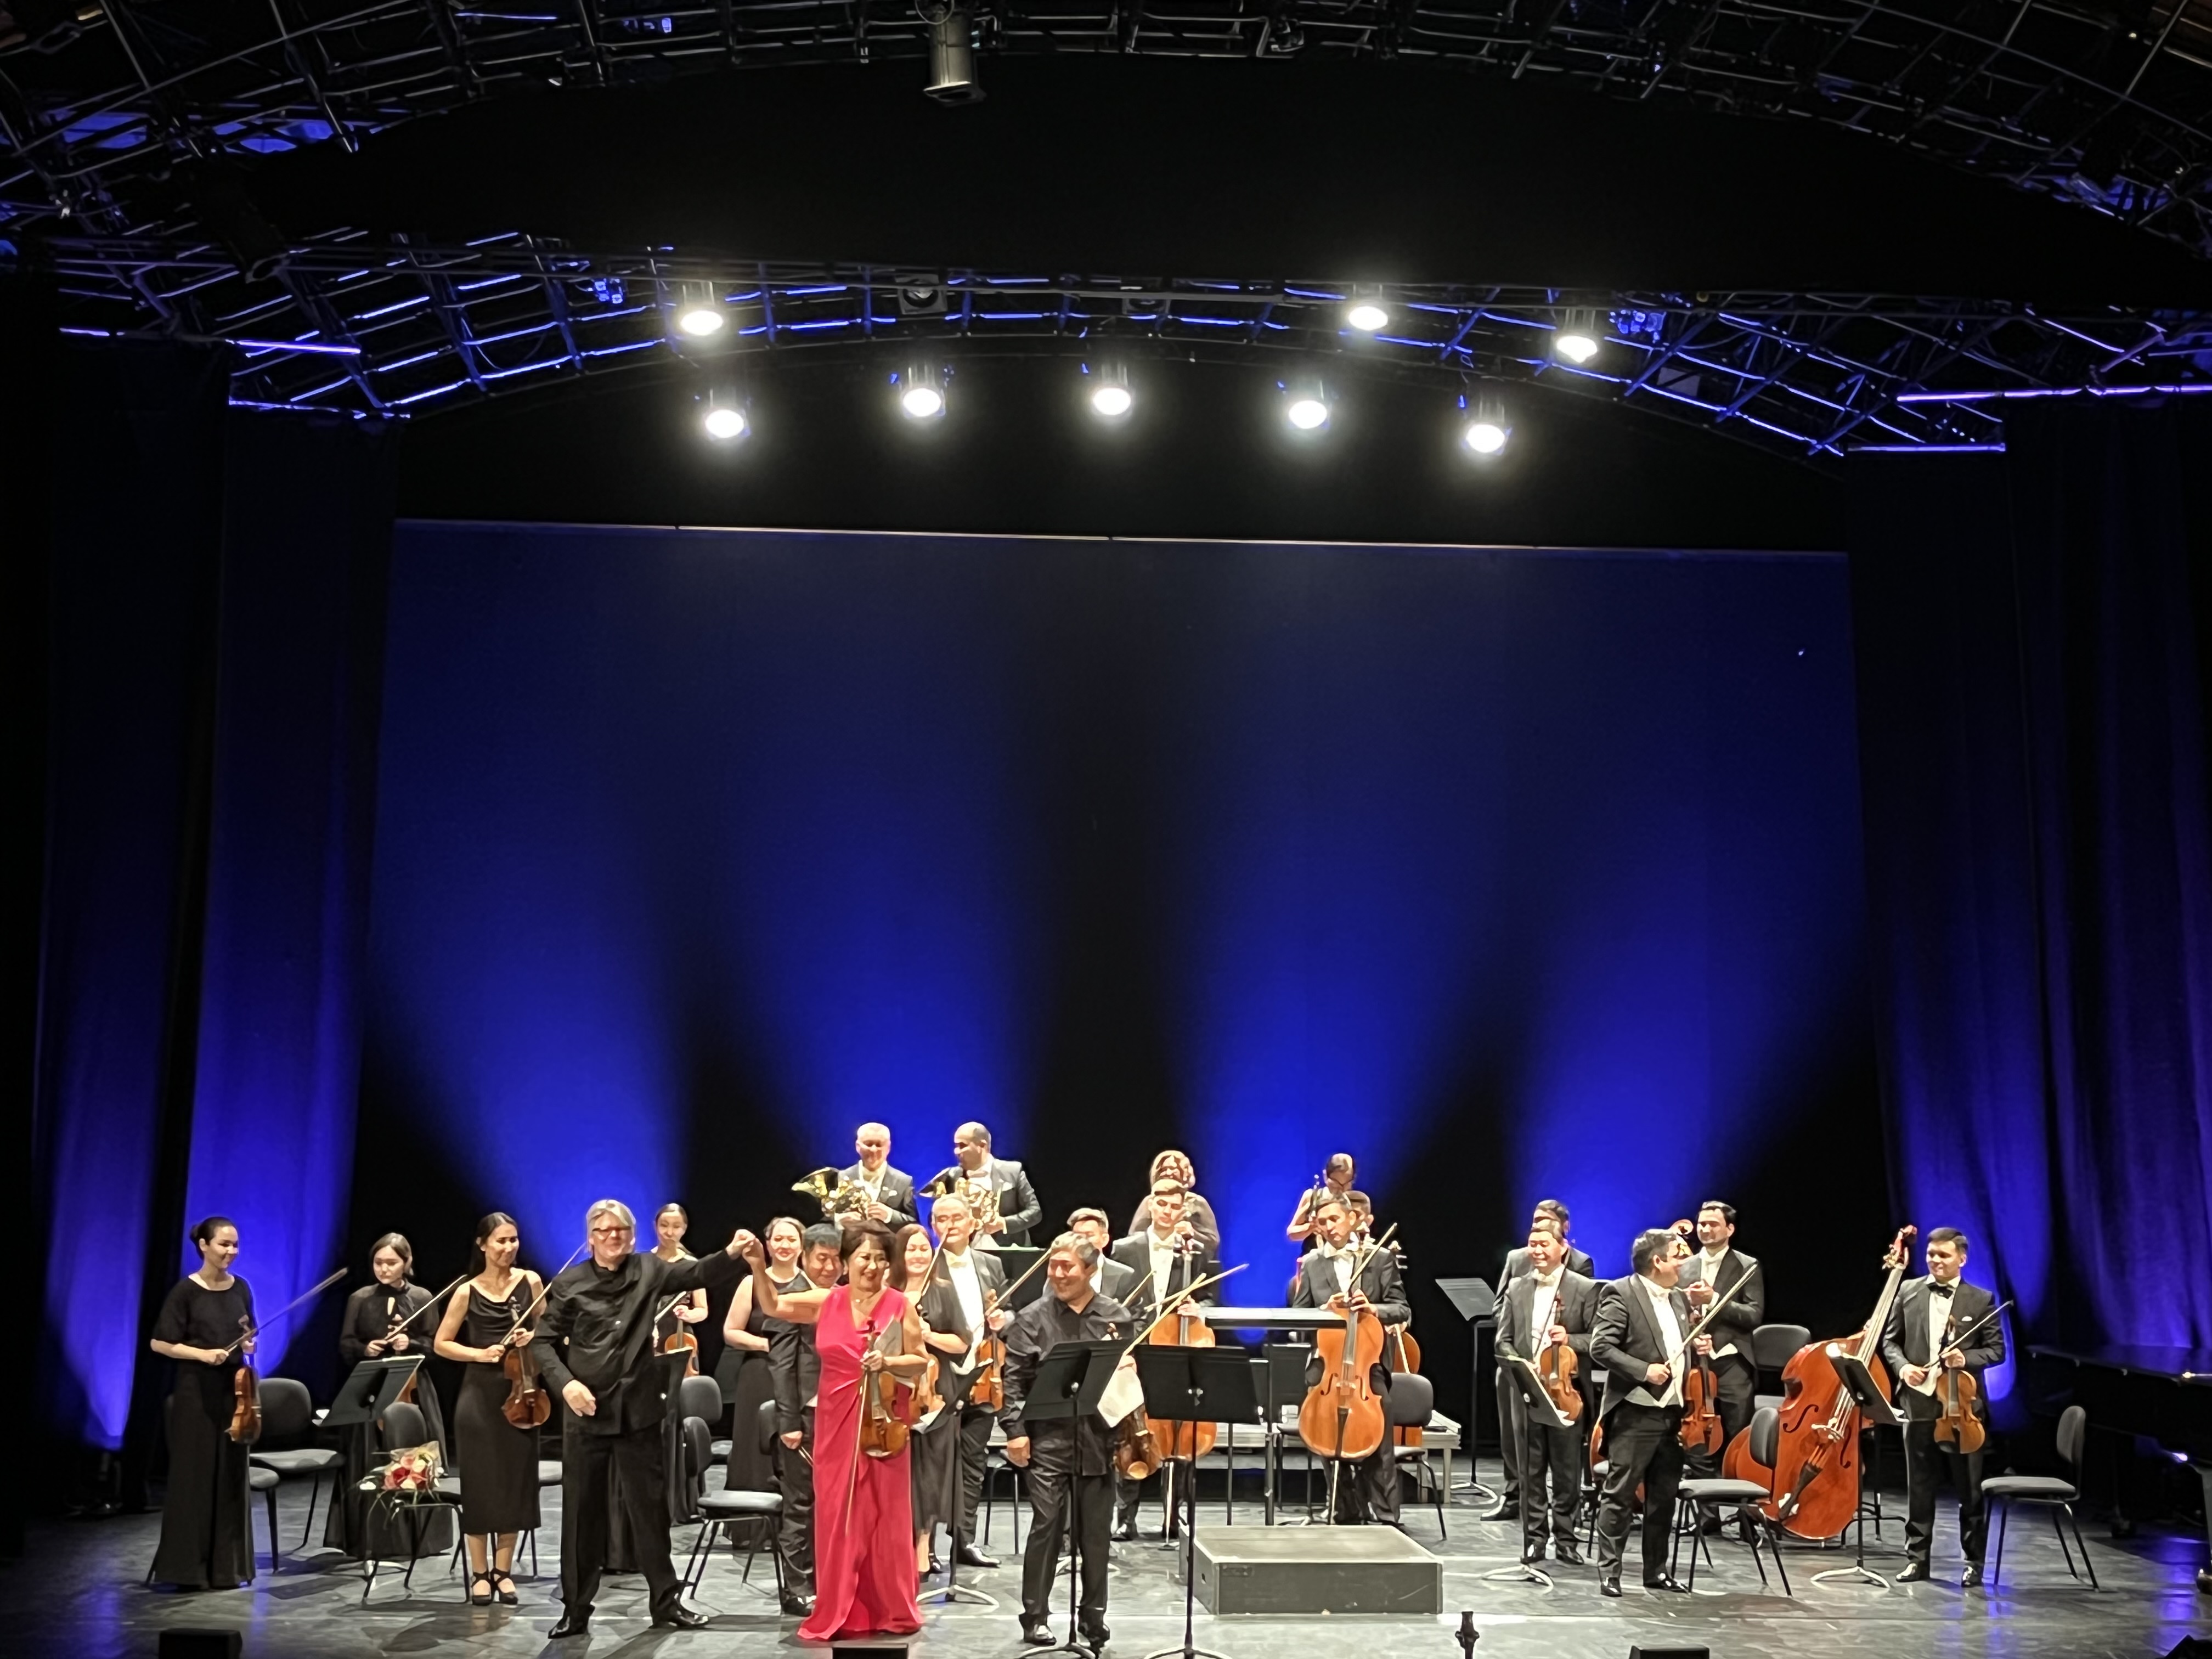 The Kazakh State Symphony Orchestra performed brilliantly at the “Nancyphonia” Festival in France